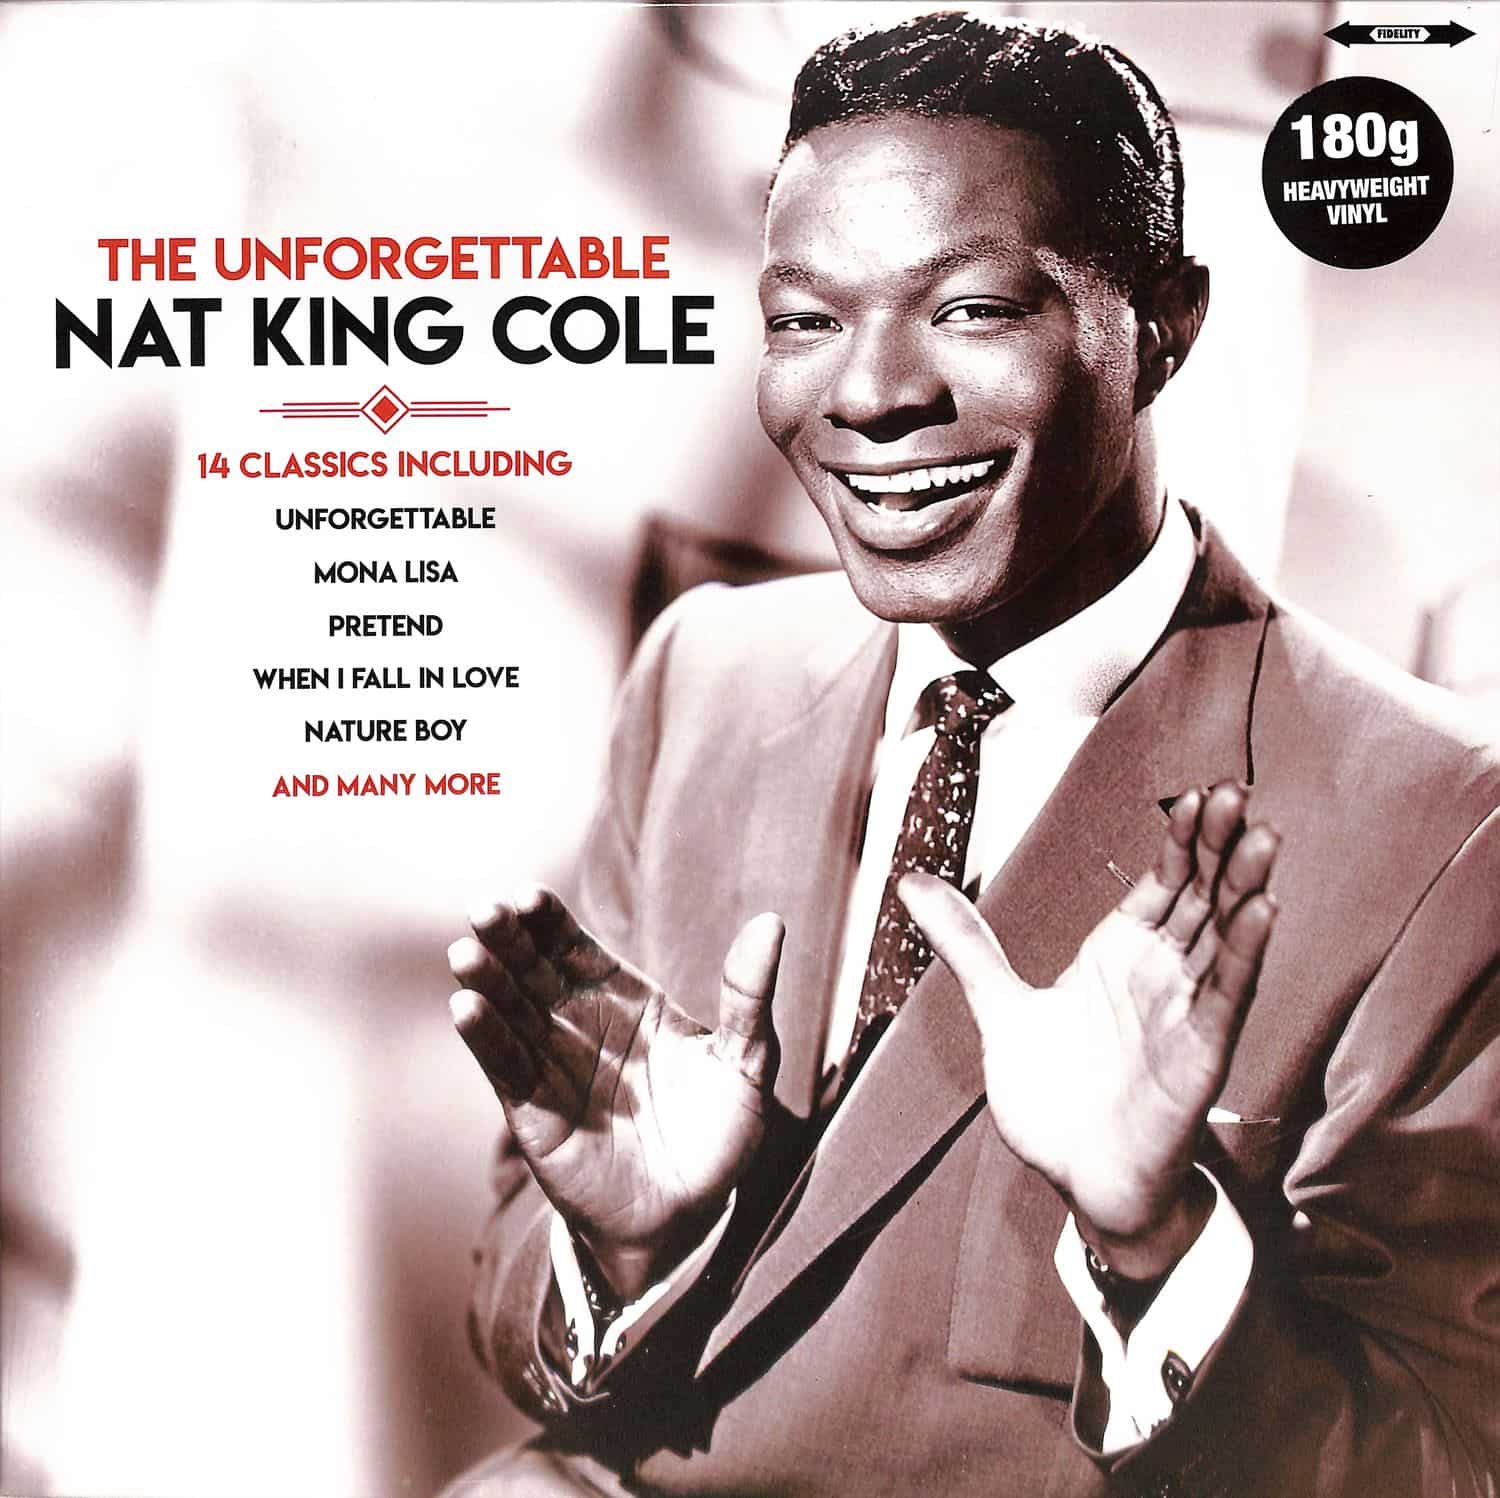 Nat King Cole - THE UNFORGETTABLE 